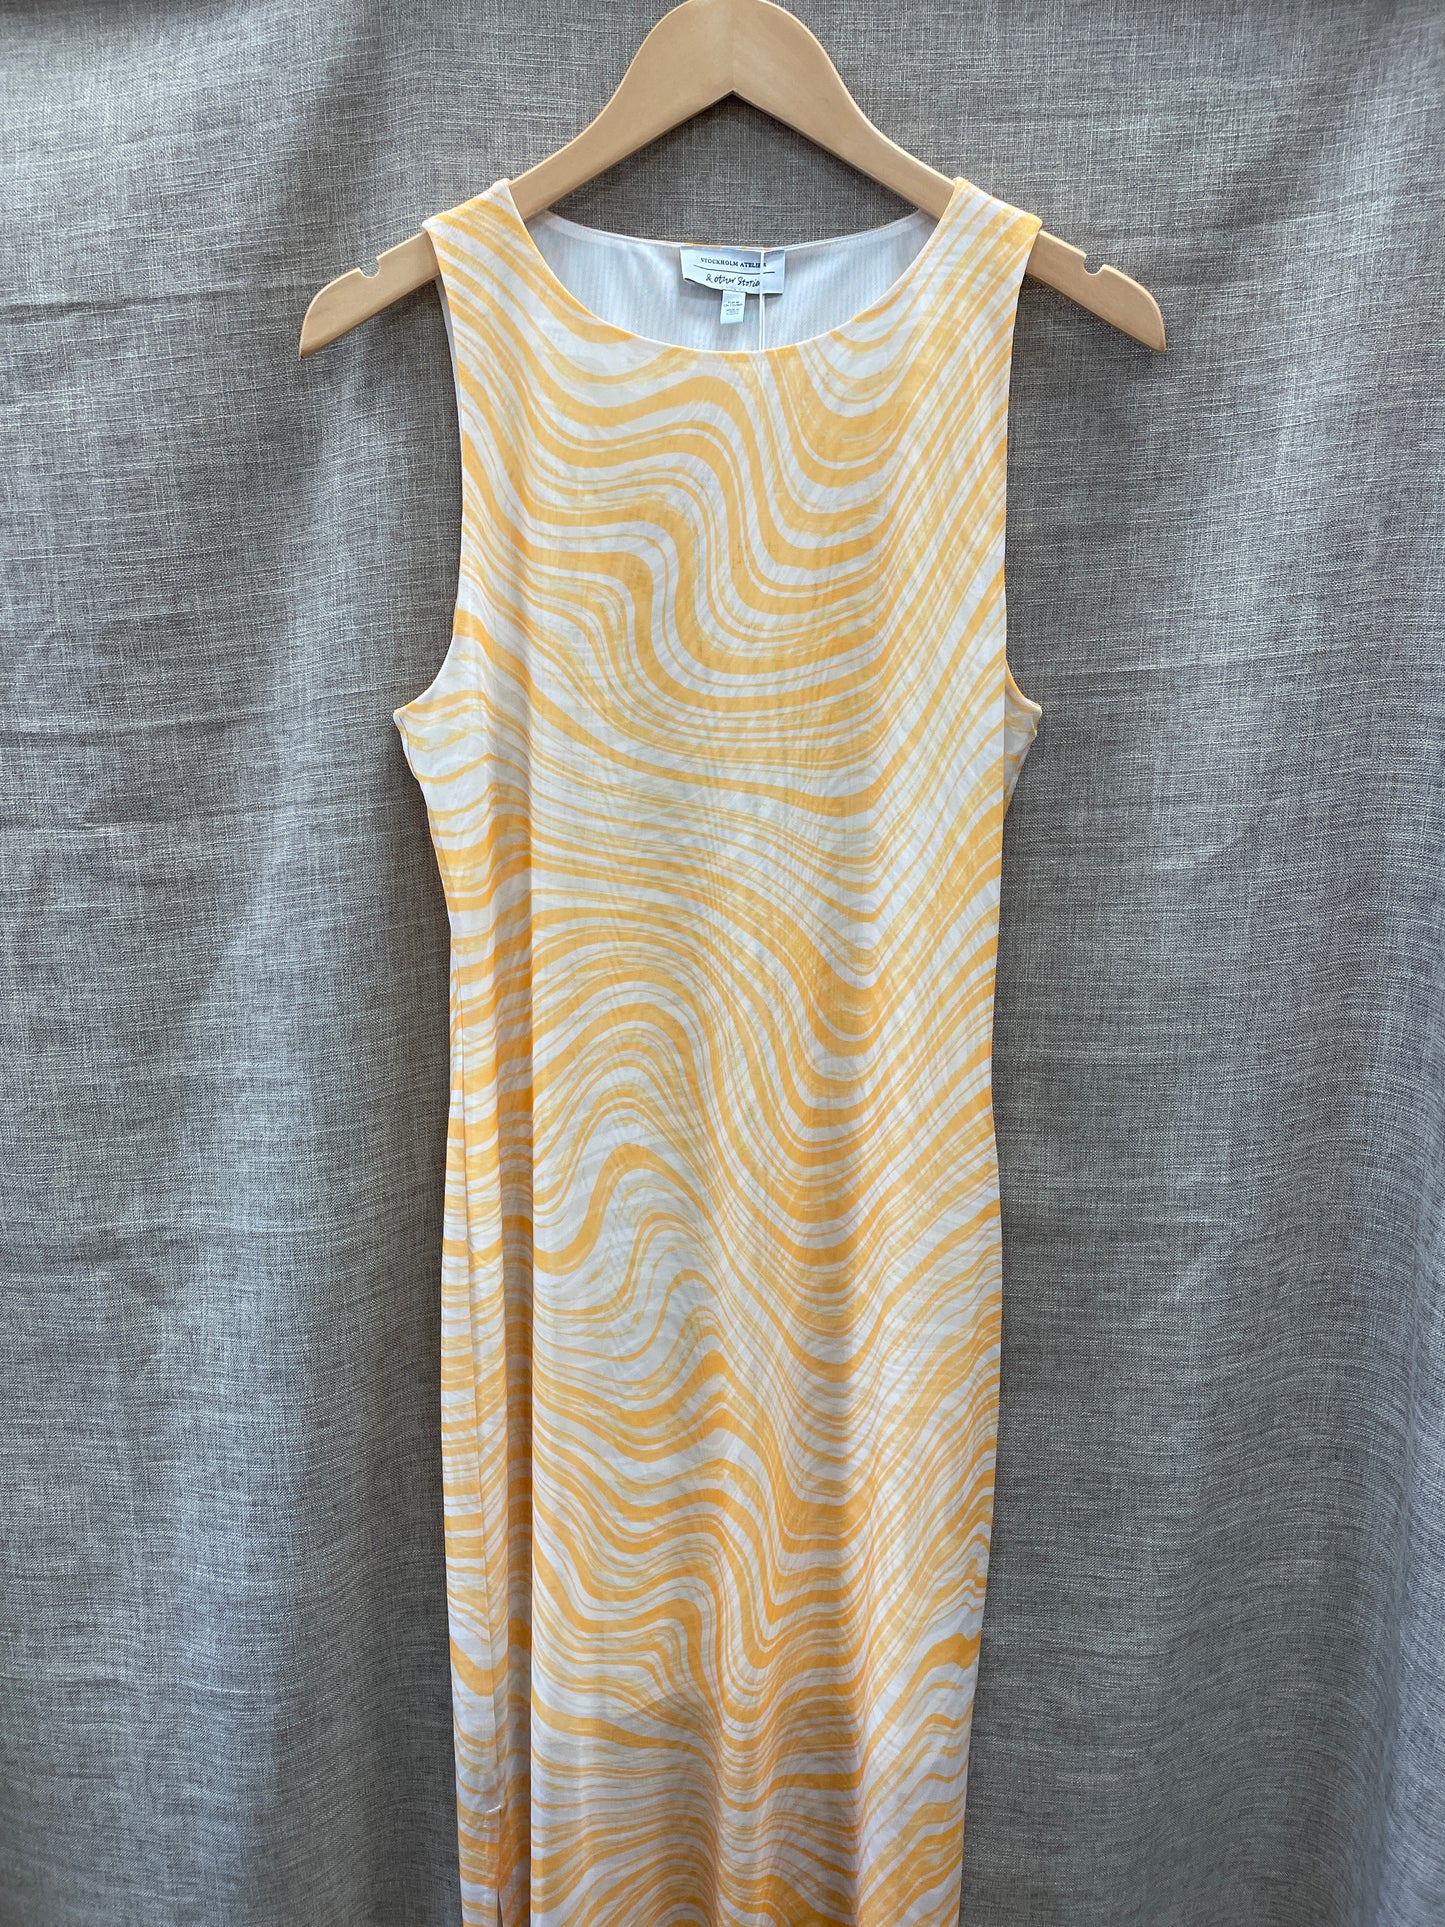 & Other Stories New with Tags Yellow & White Gauze Overlay Maxi Dress Medium